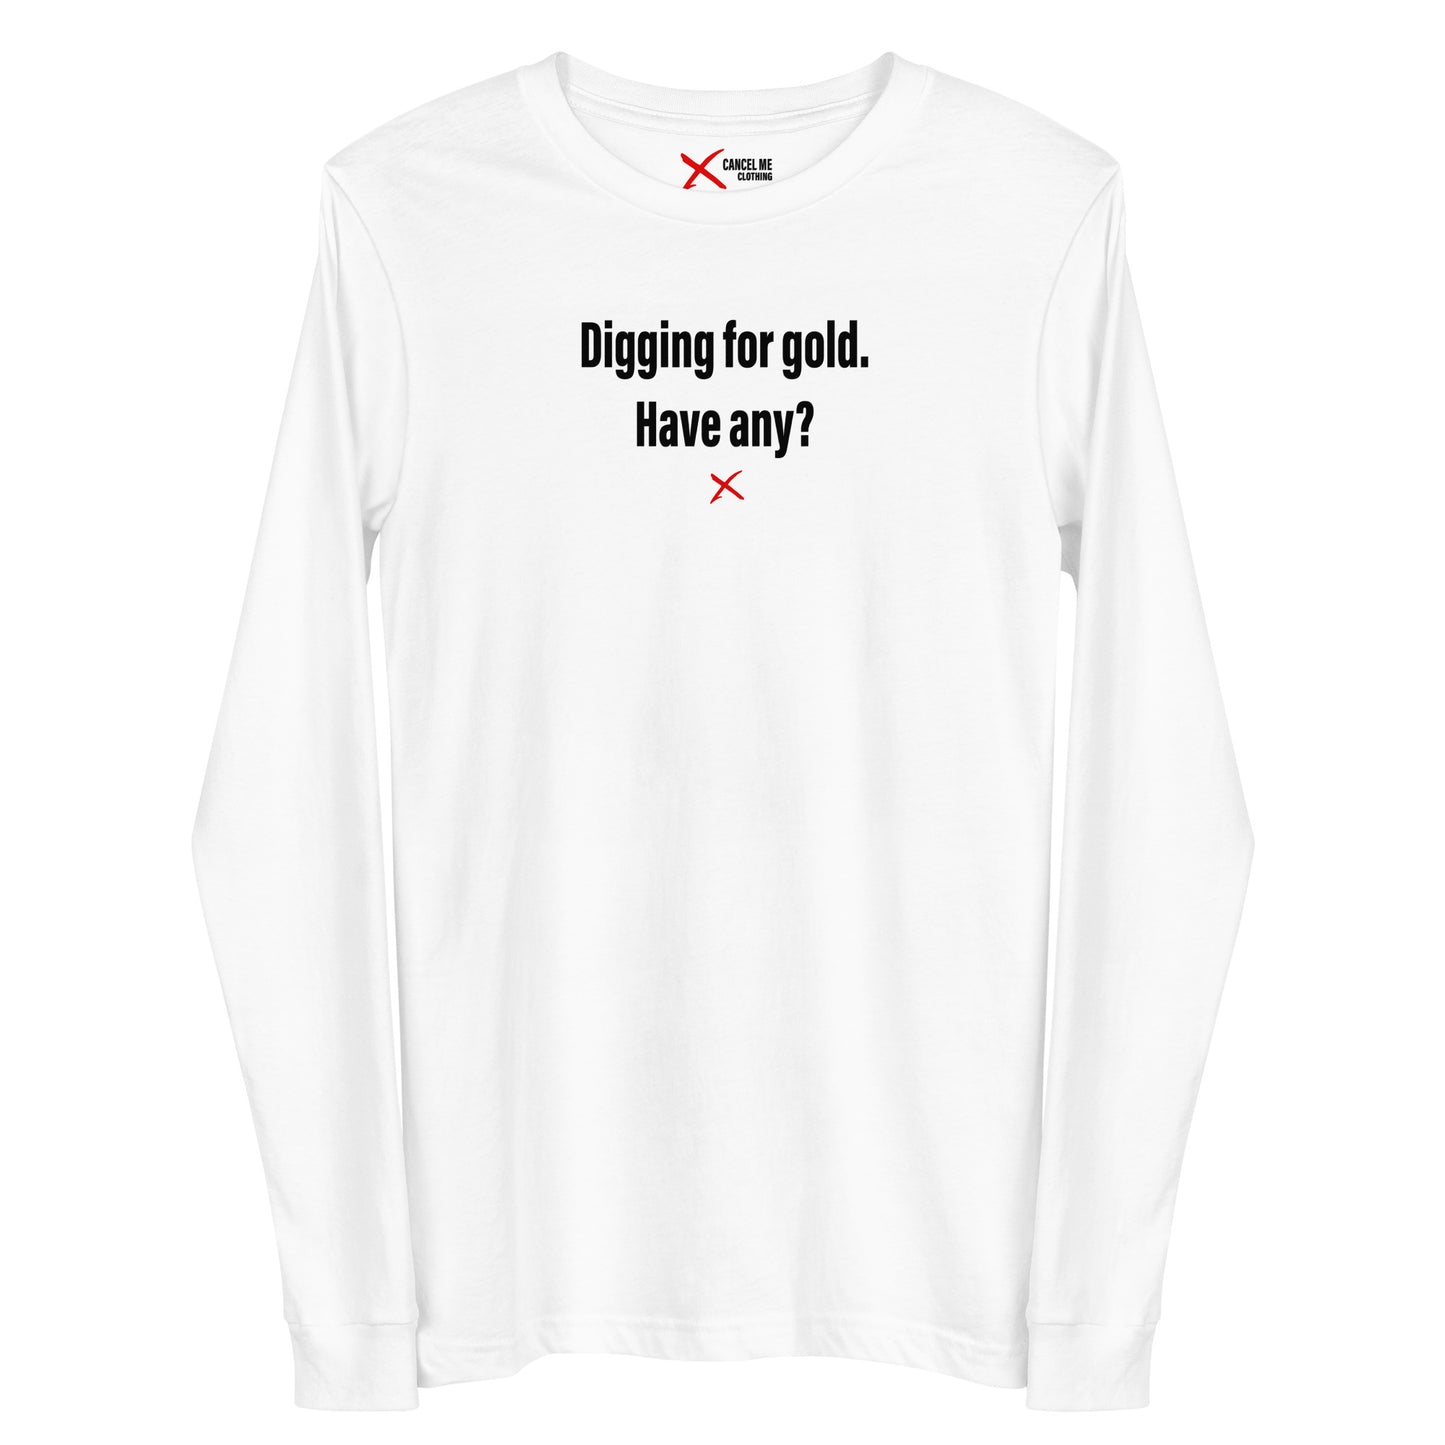 Digging for gold. Have any? - Longsleeve